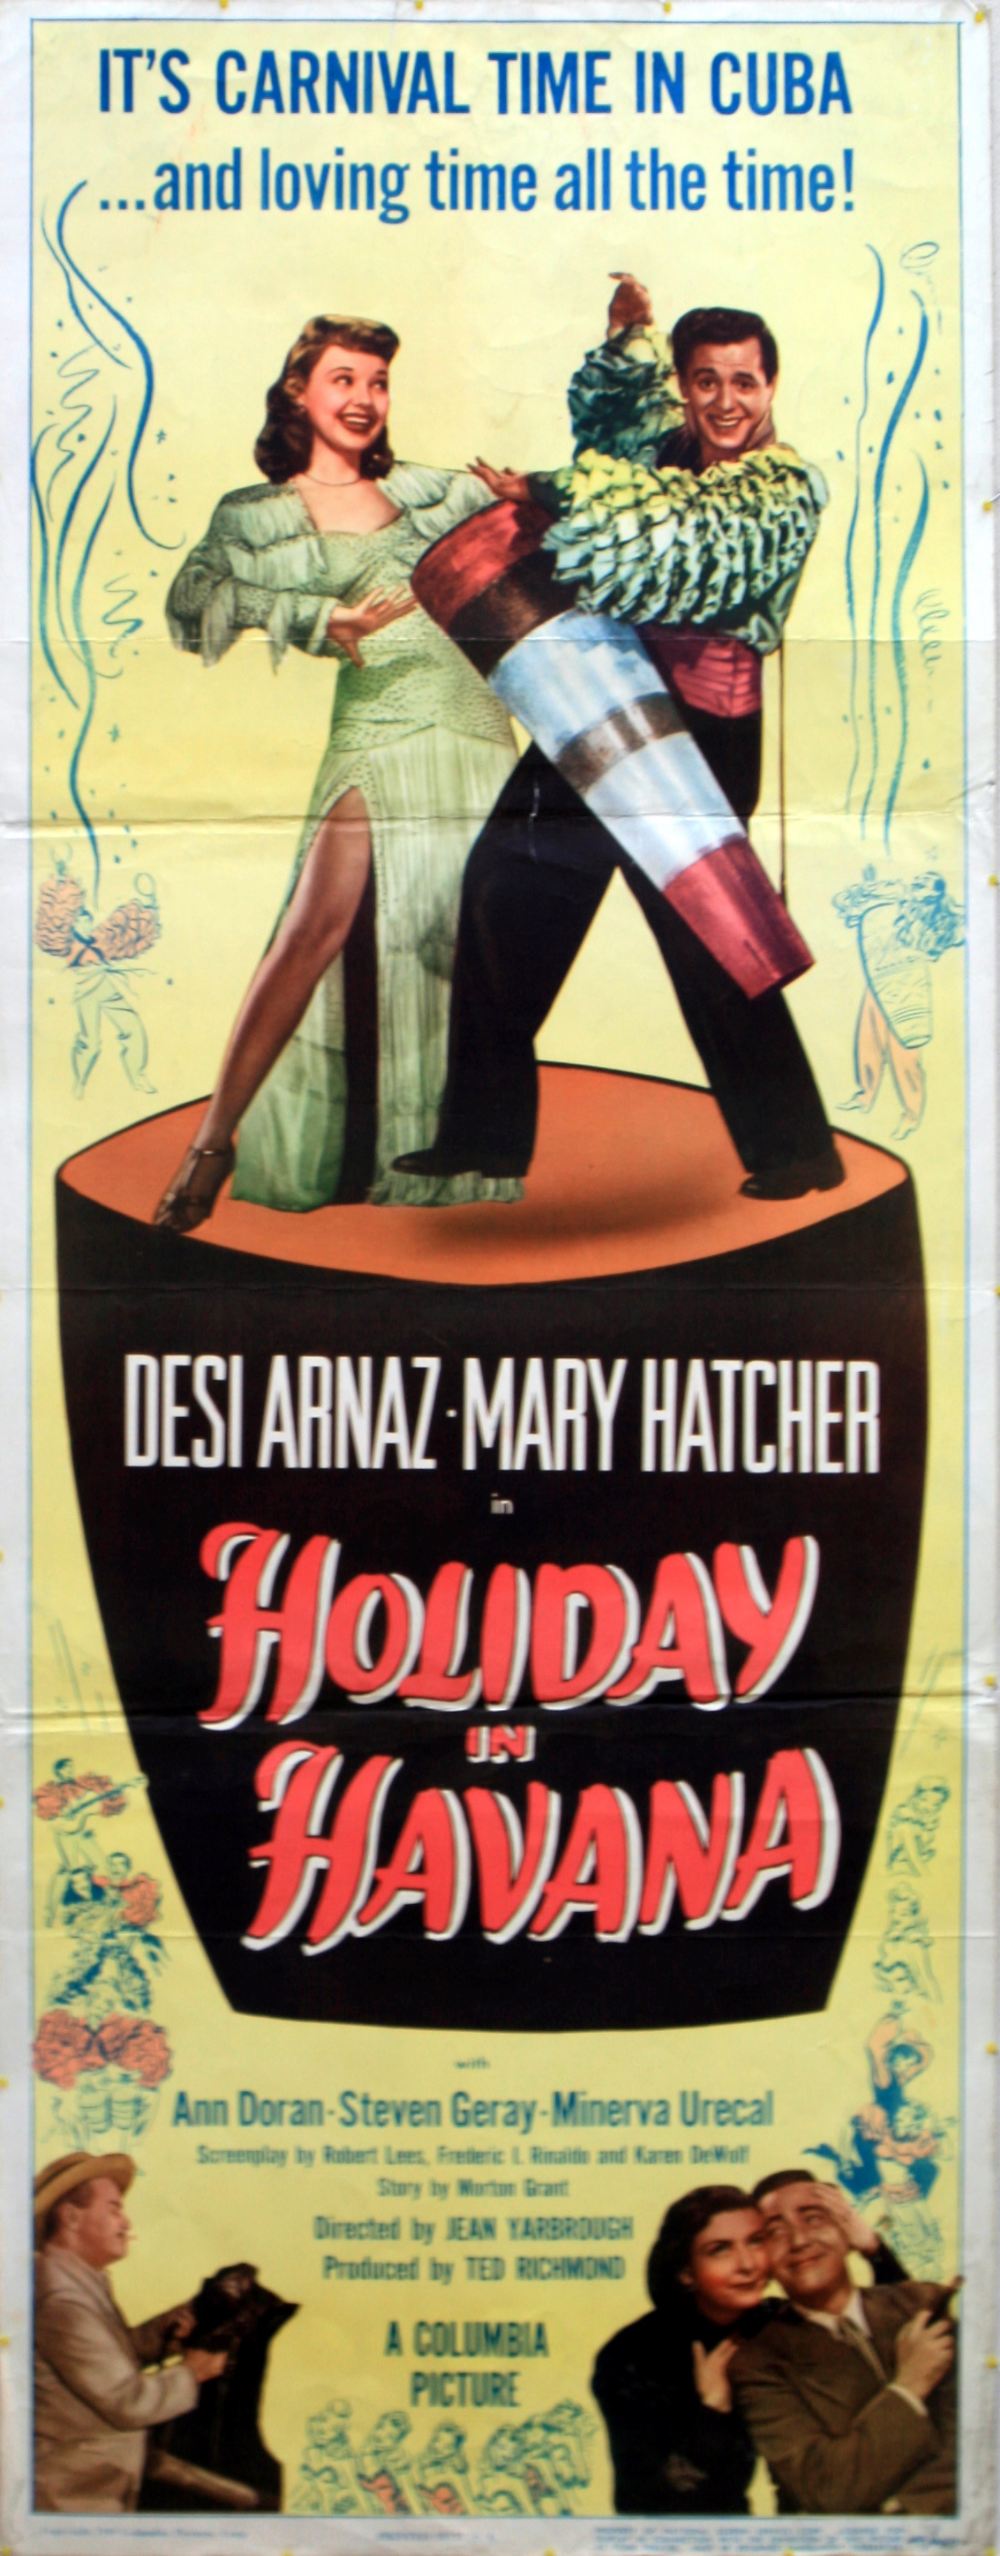 Original vintage film poster for a movie, Holiday in Havana, featuring Desi Arnaz and Mary Hatcher.